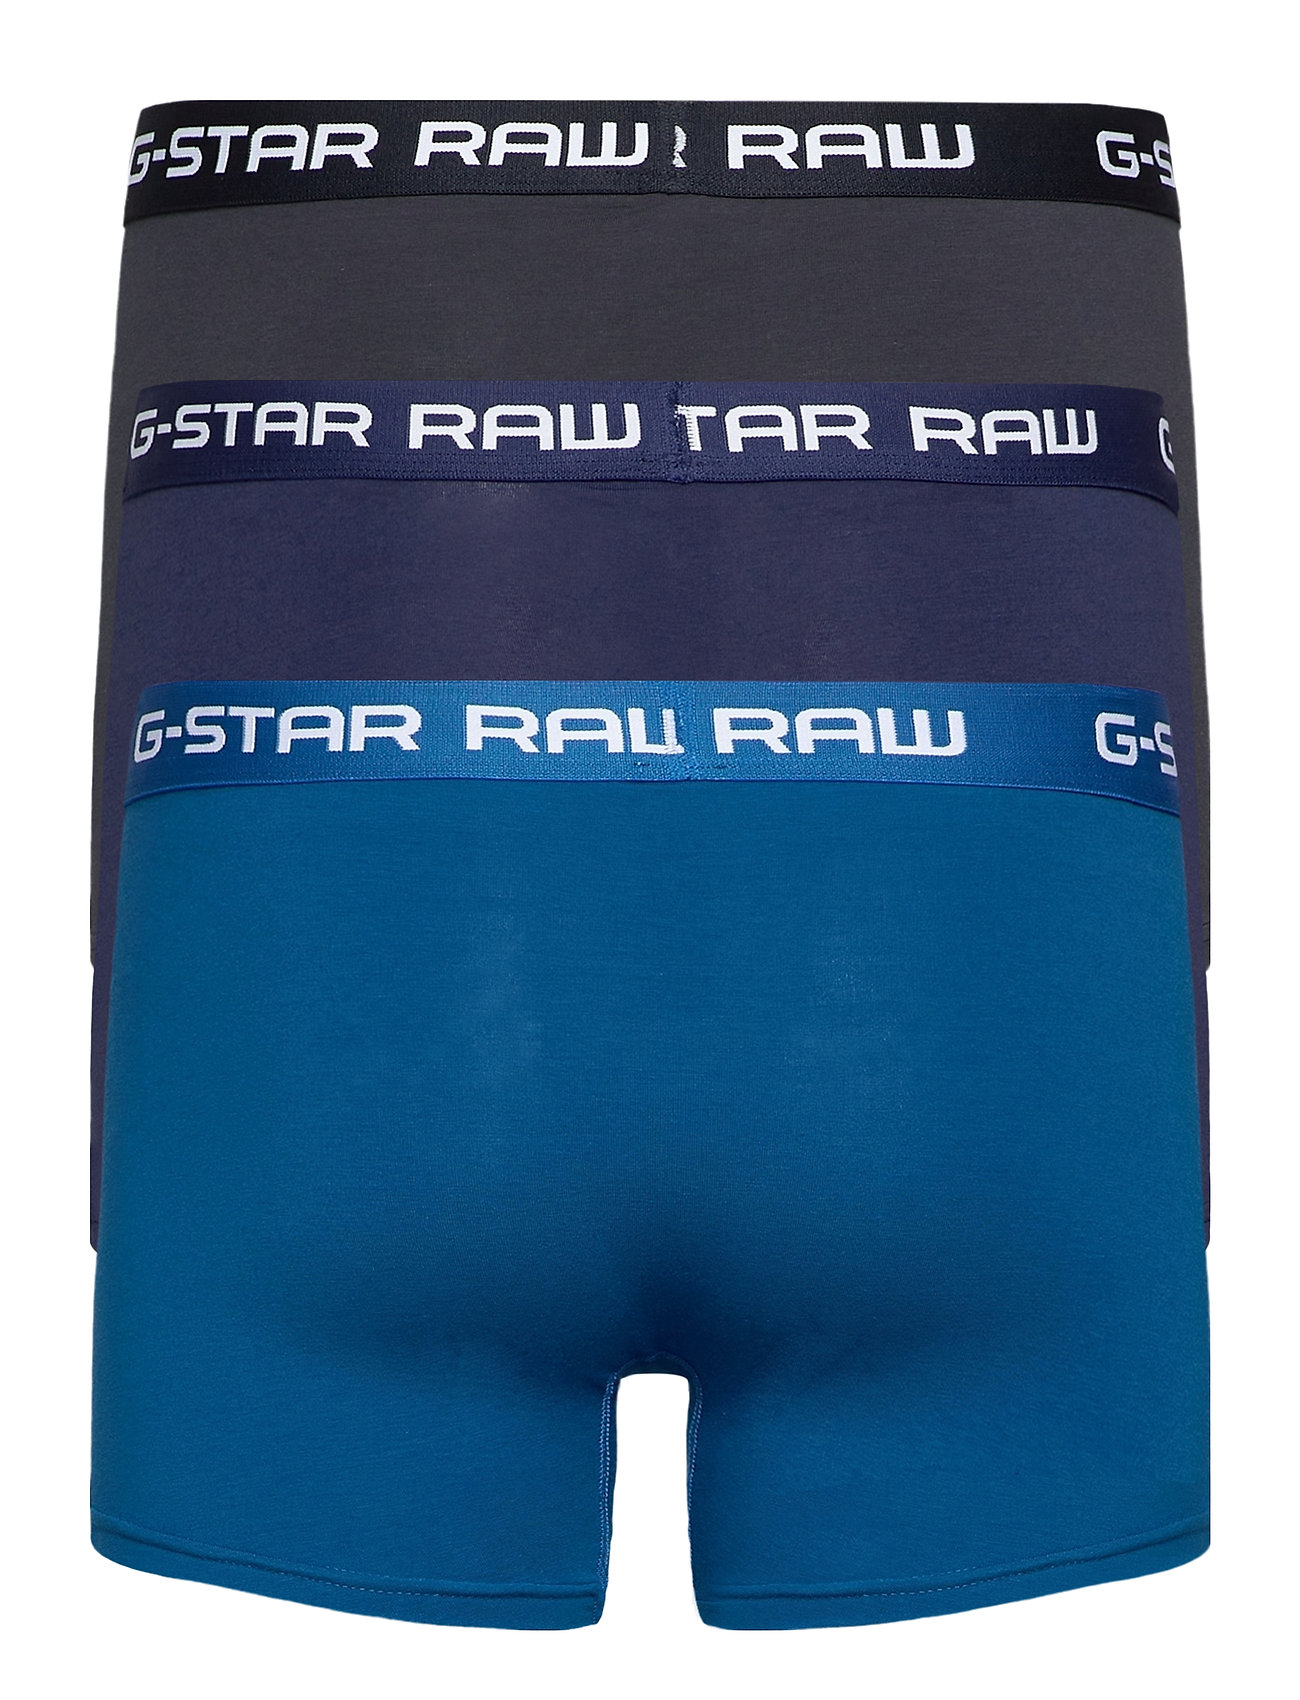 G-Star RAW - Classic trunk clr 3 pack - lowest prices - lt nassau blue-imperial blue-maz bl - 1